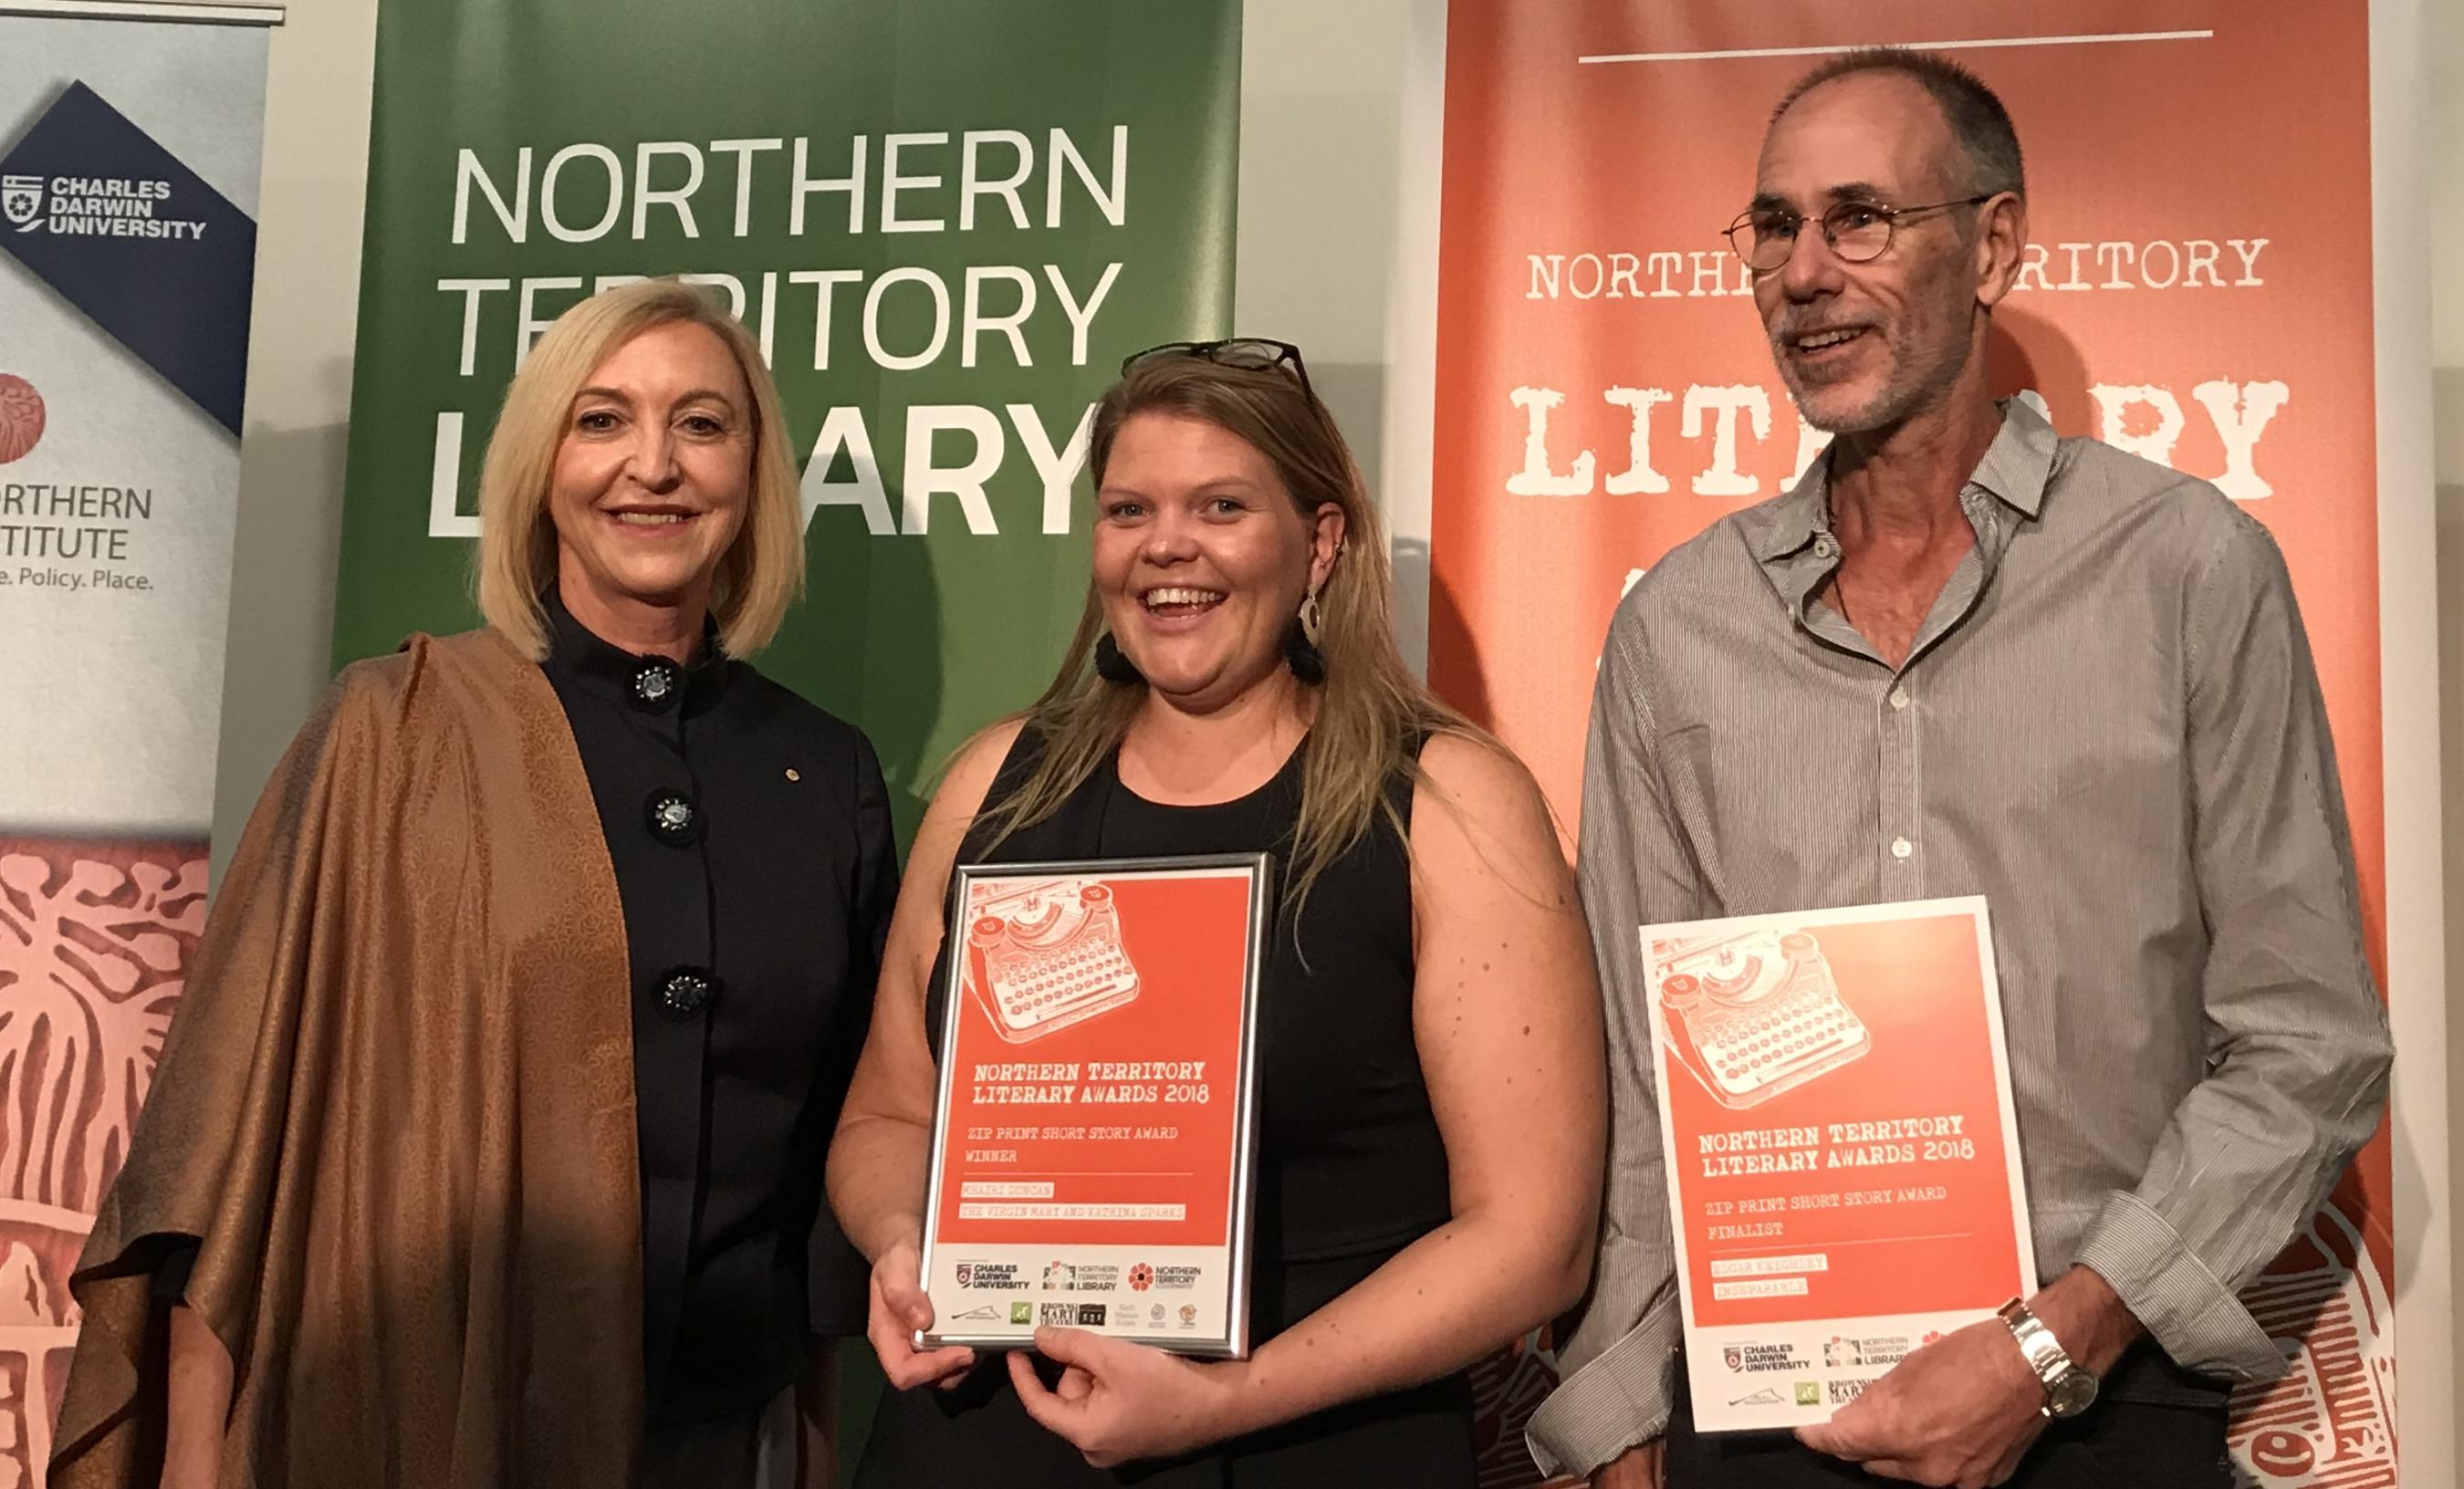 Her Honour the Hounourable Vicki O'Halloran Administrator of the Northern Territory with Mharii Duncan winner of the Short Story Award and Edgar Keighley finalist in the Poetry Award. Event banners in the background. 